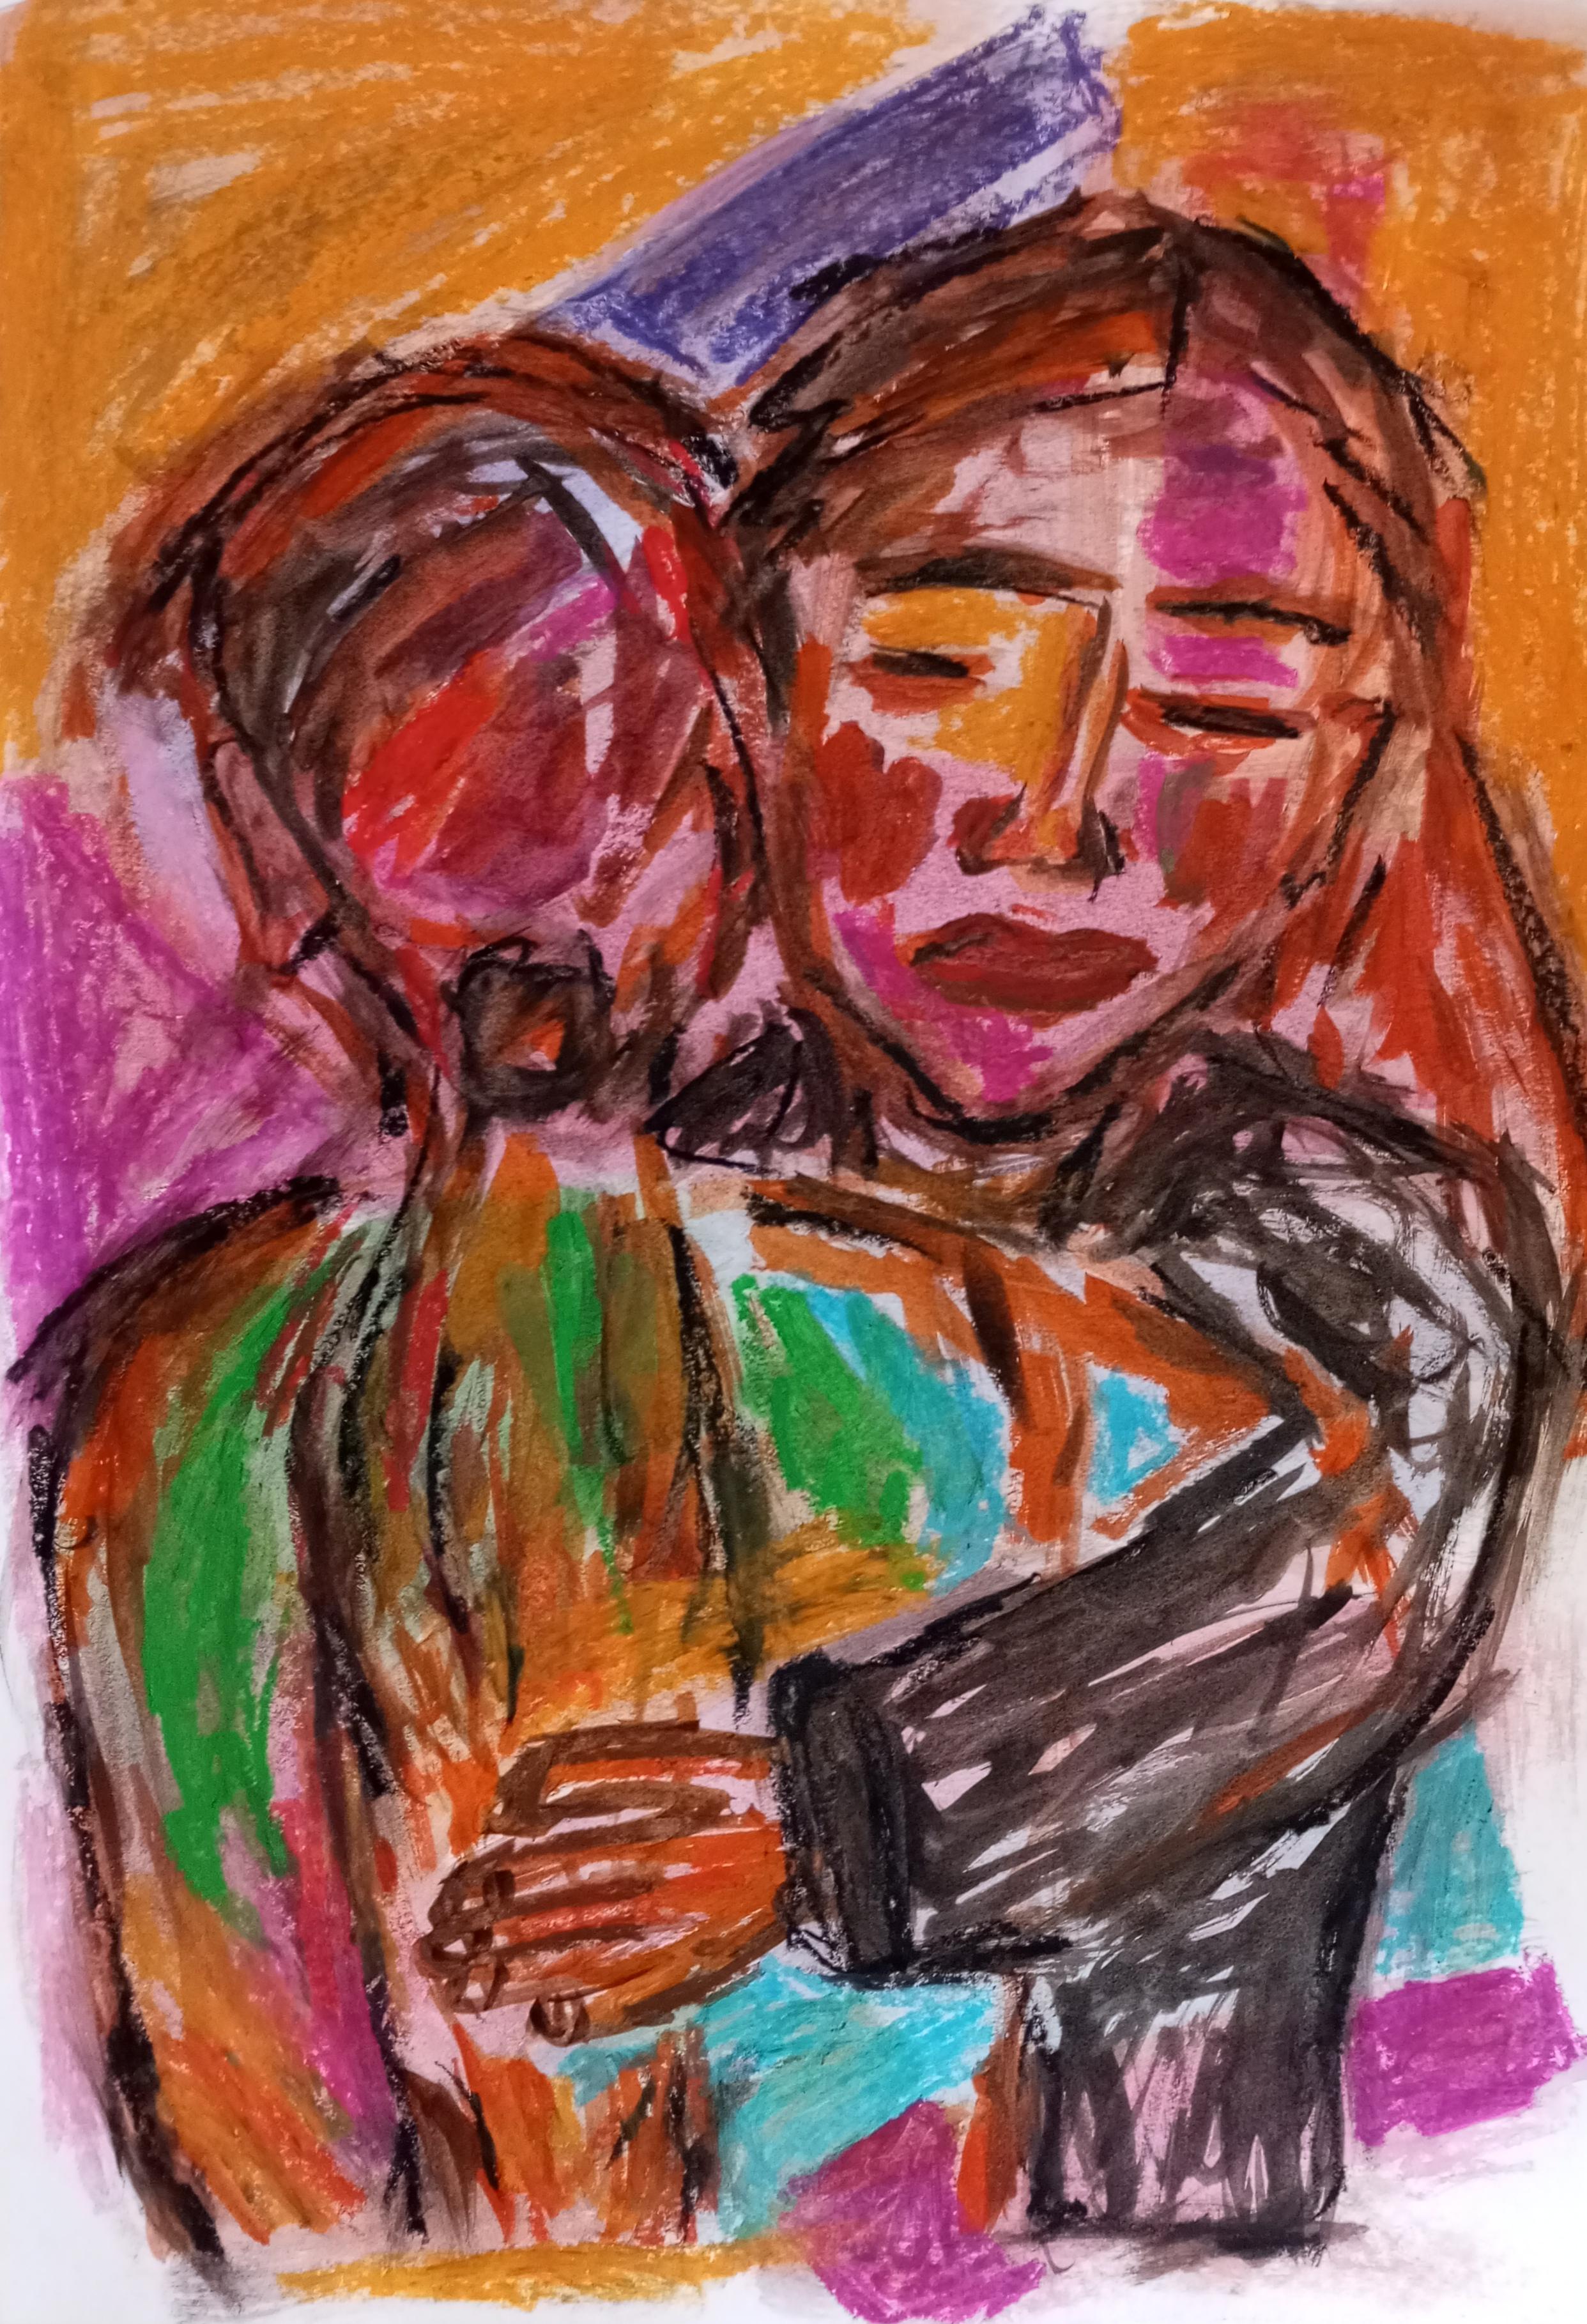 Two women hugging each other painting on paper "You are my rock" 